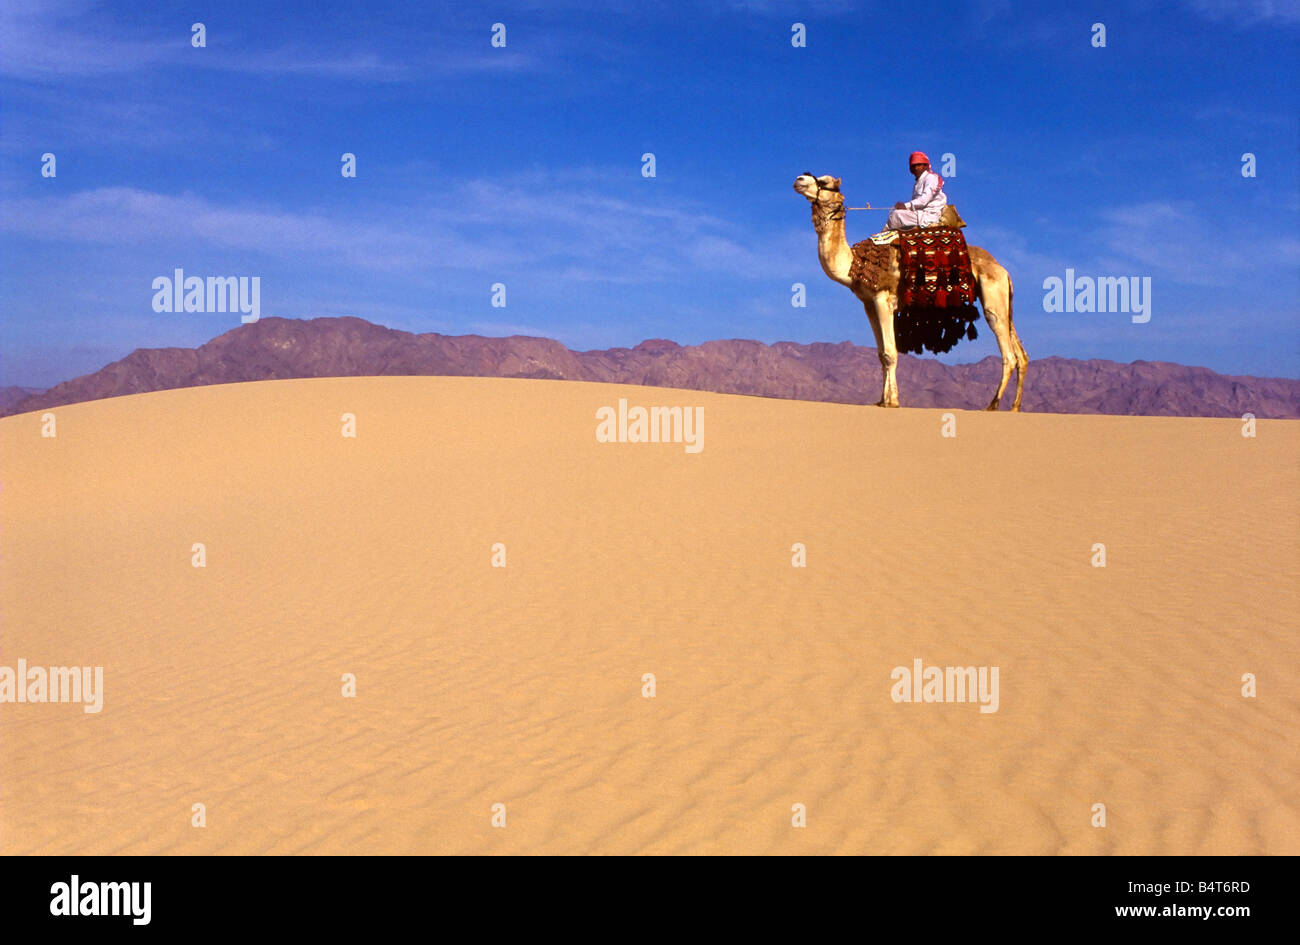 A Bedouin dressed in traditional robes on a camel in the Sinai desert of Egypt. Stock Photo